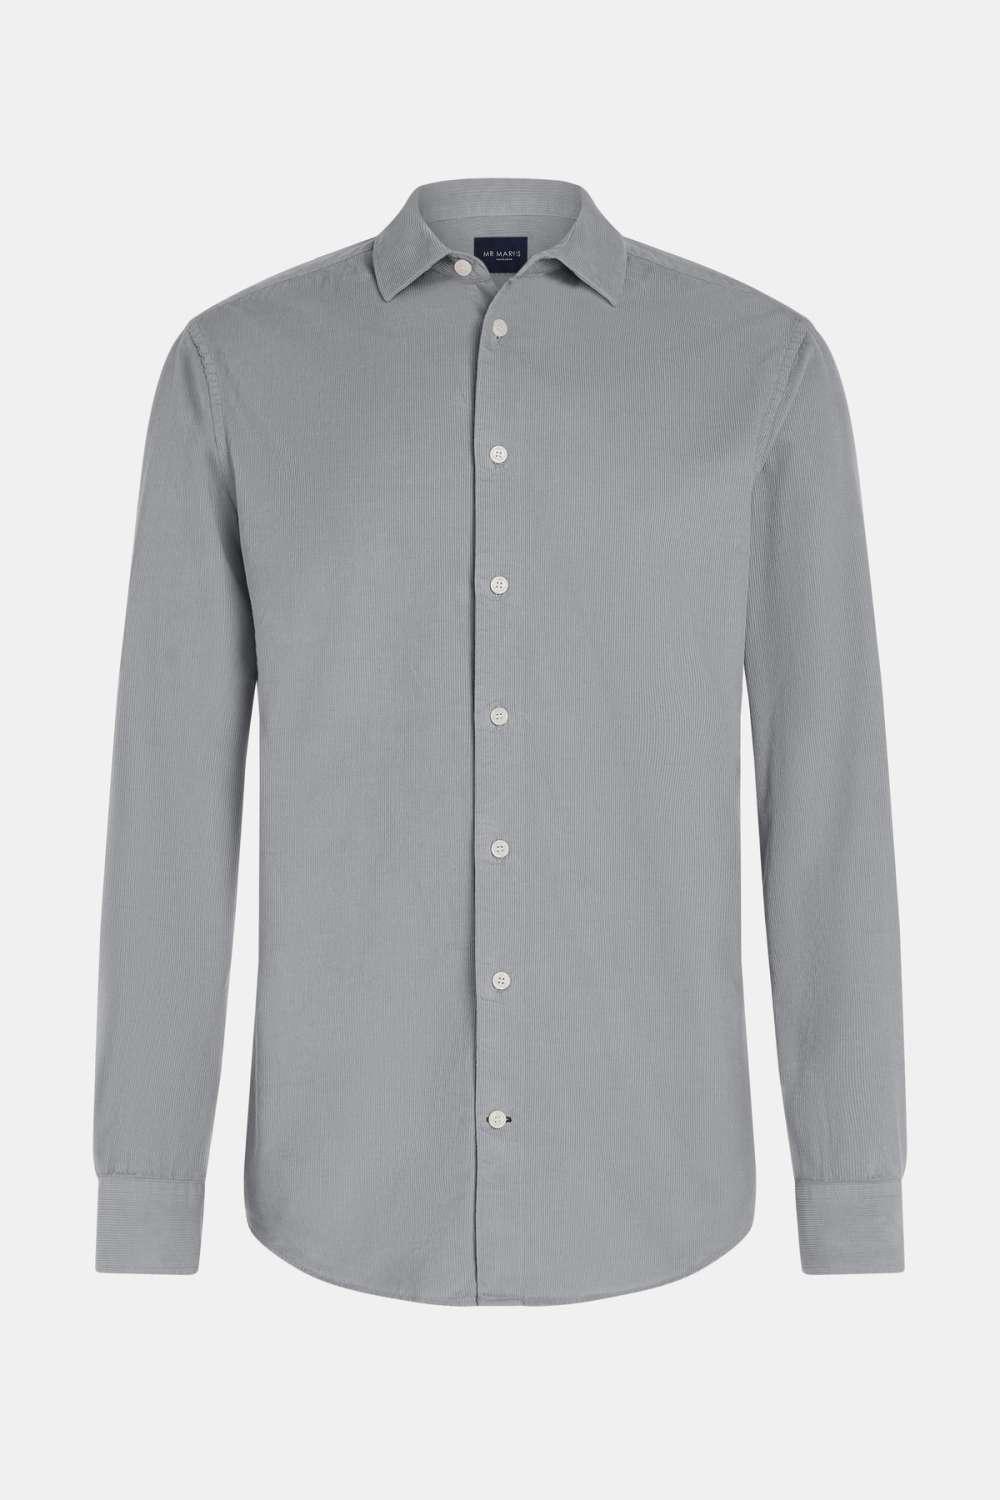 Oysters * The Cord Shirt